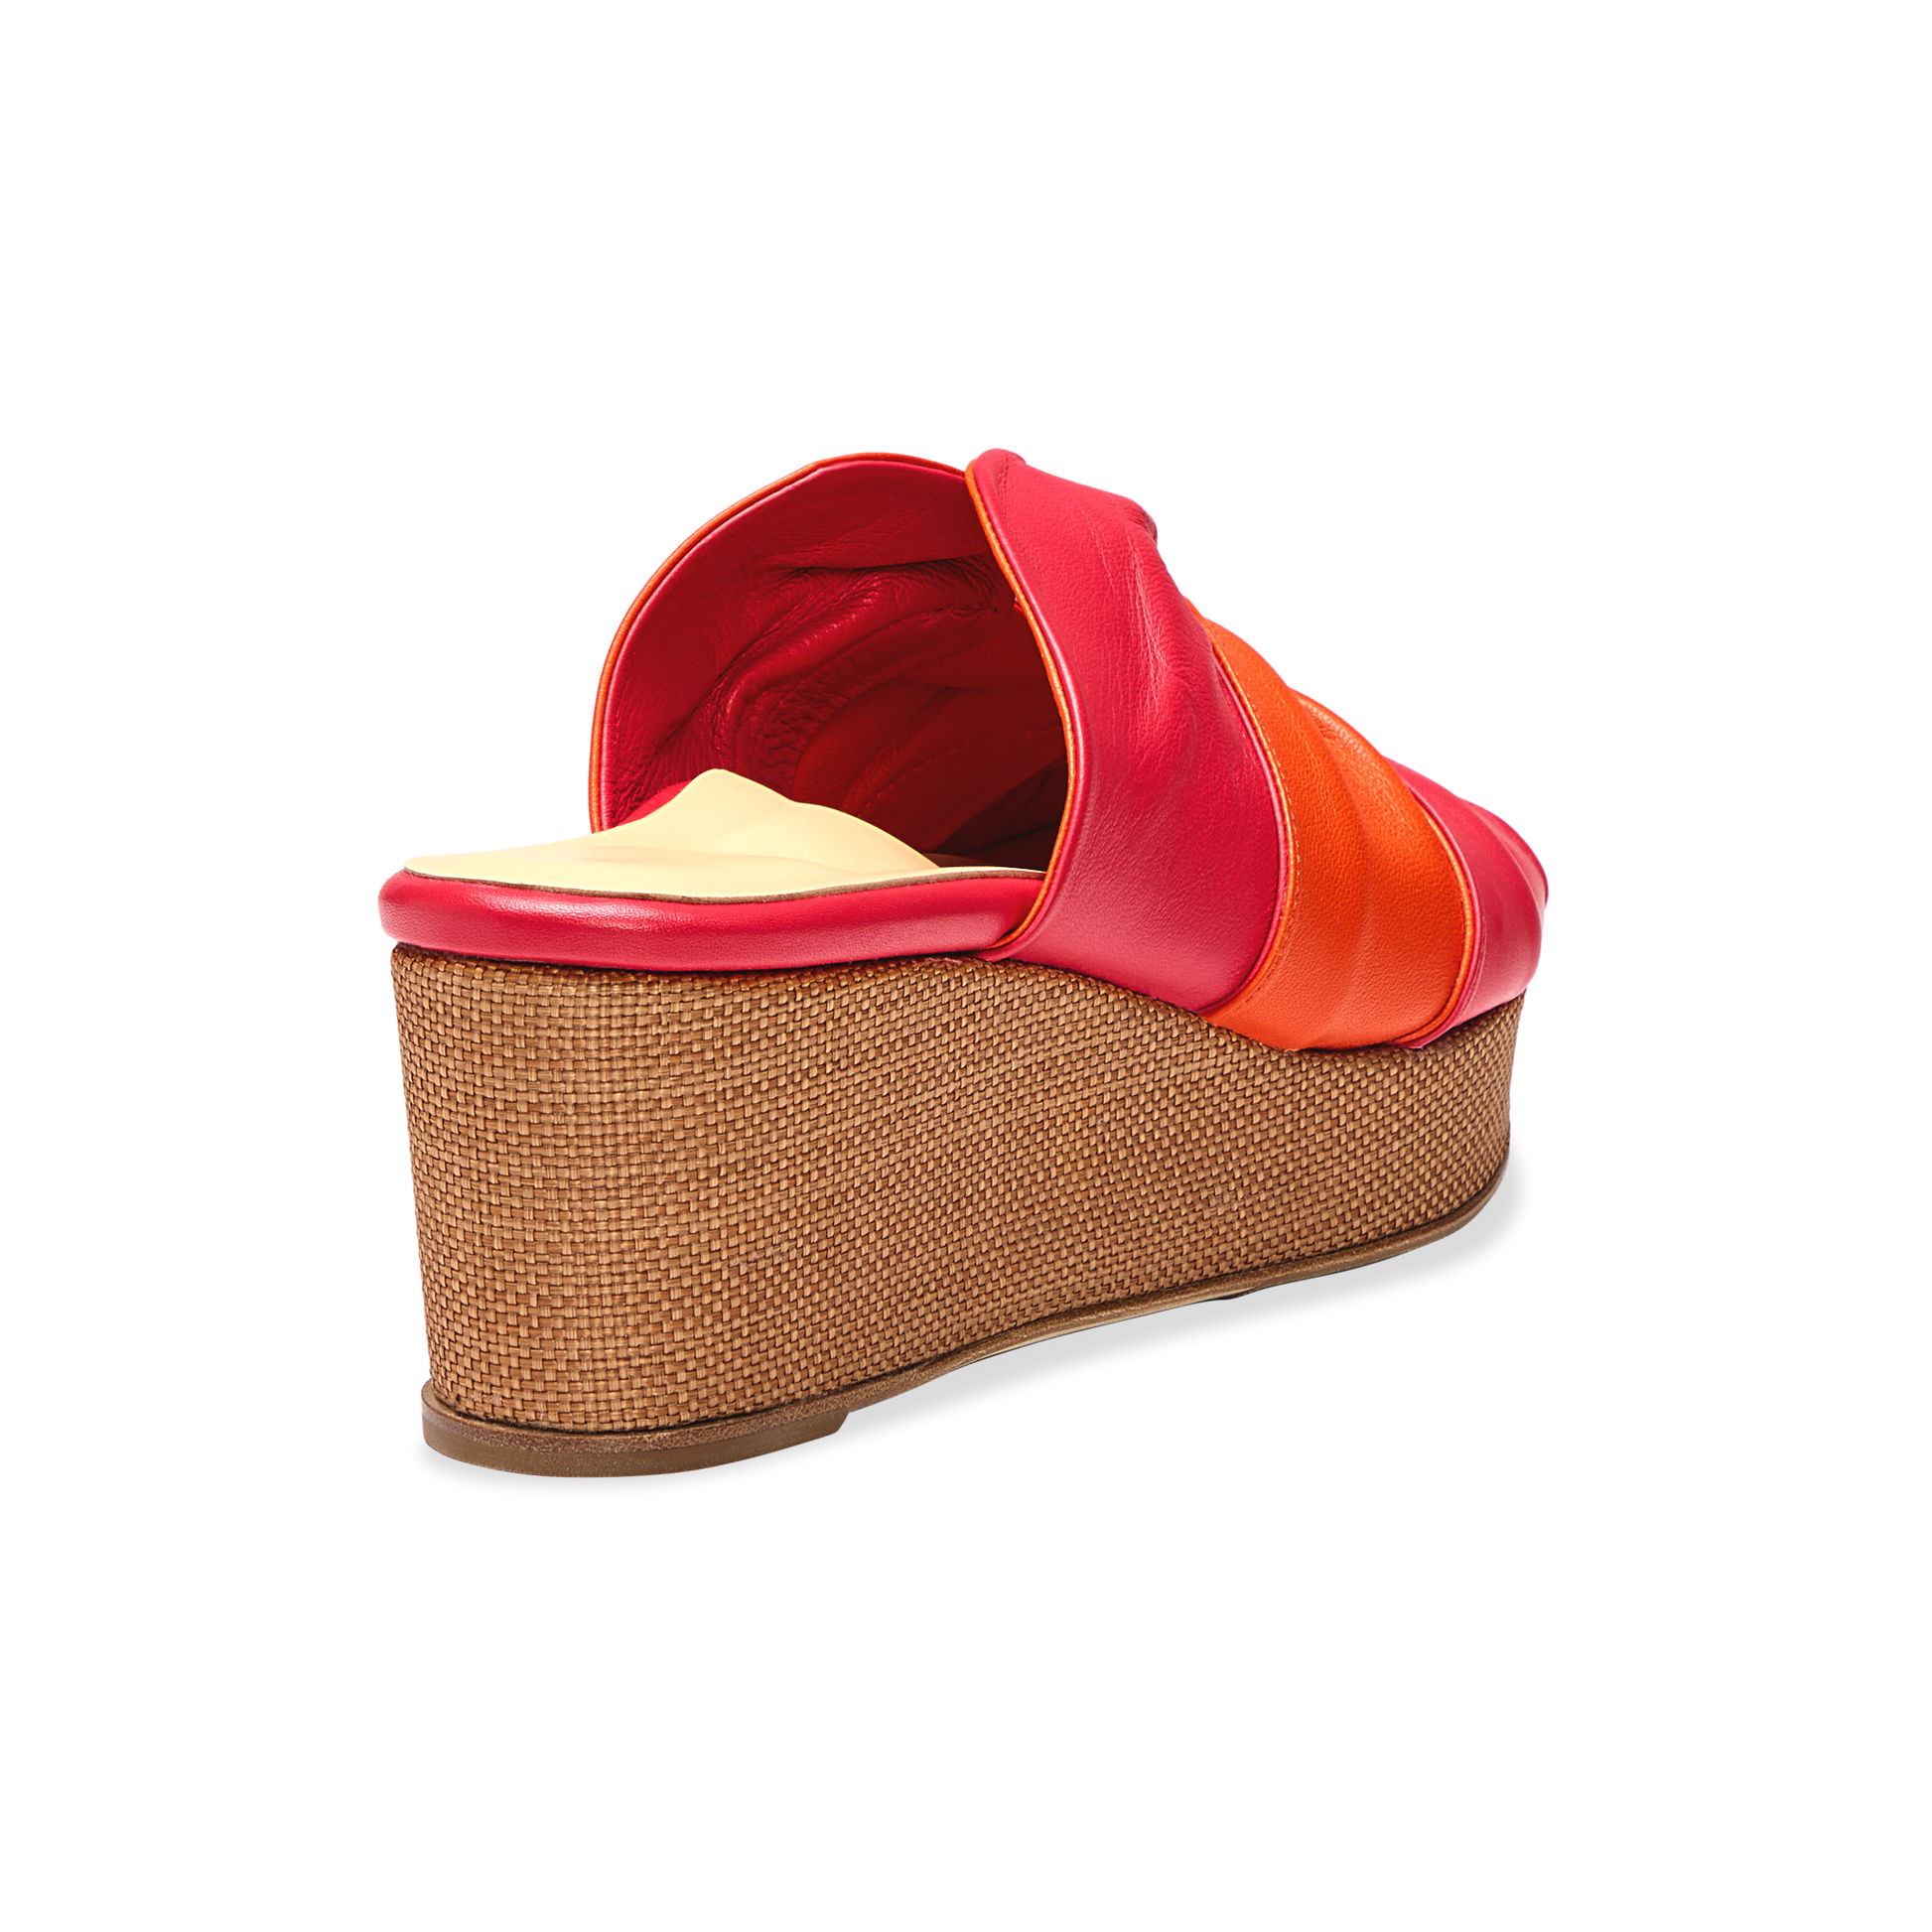 Perfect Arabesque Wedge 50 in Positano Pink Nappa & Woven Wedge